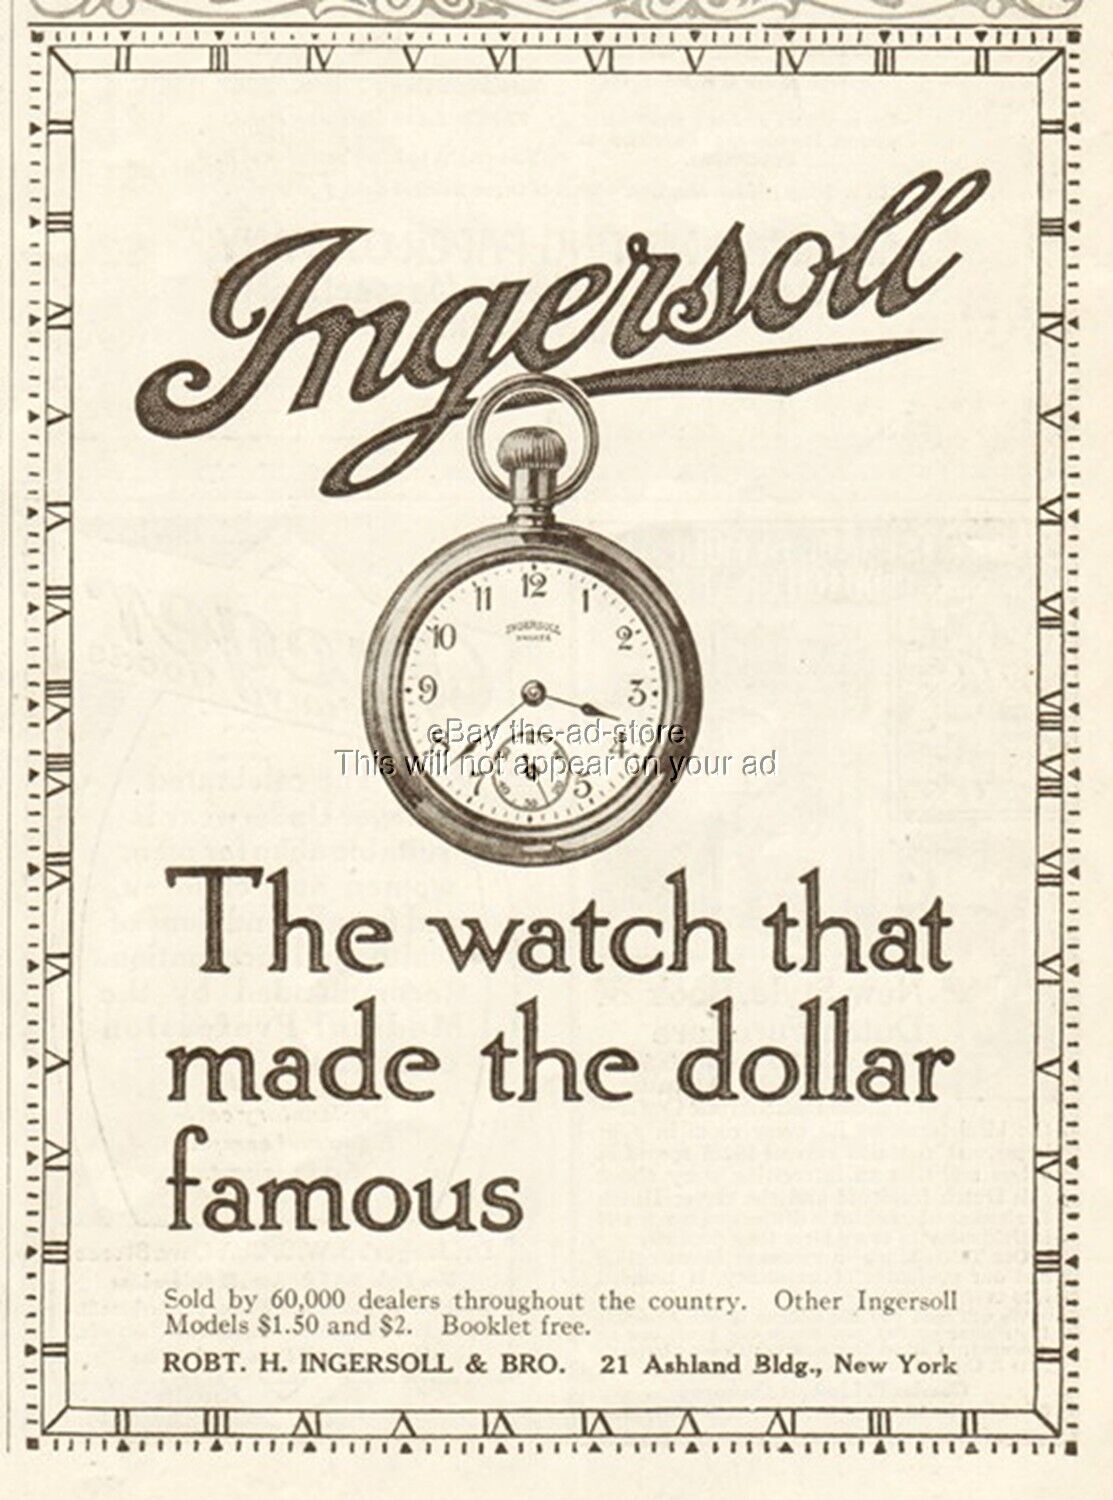 1912 Robert H Ingersoll Yankee Pocket Watch That Made The Dollar Famous Ad